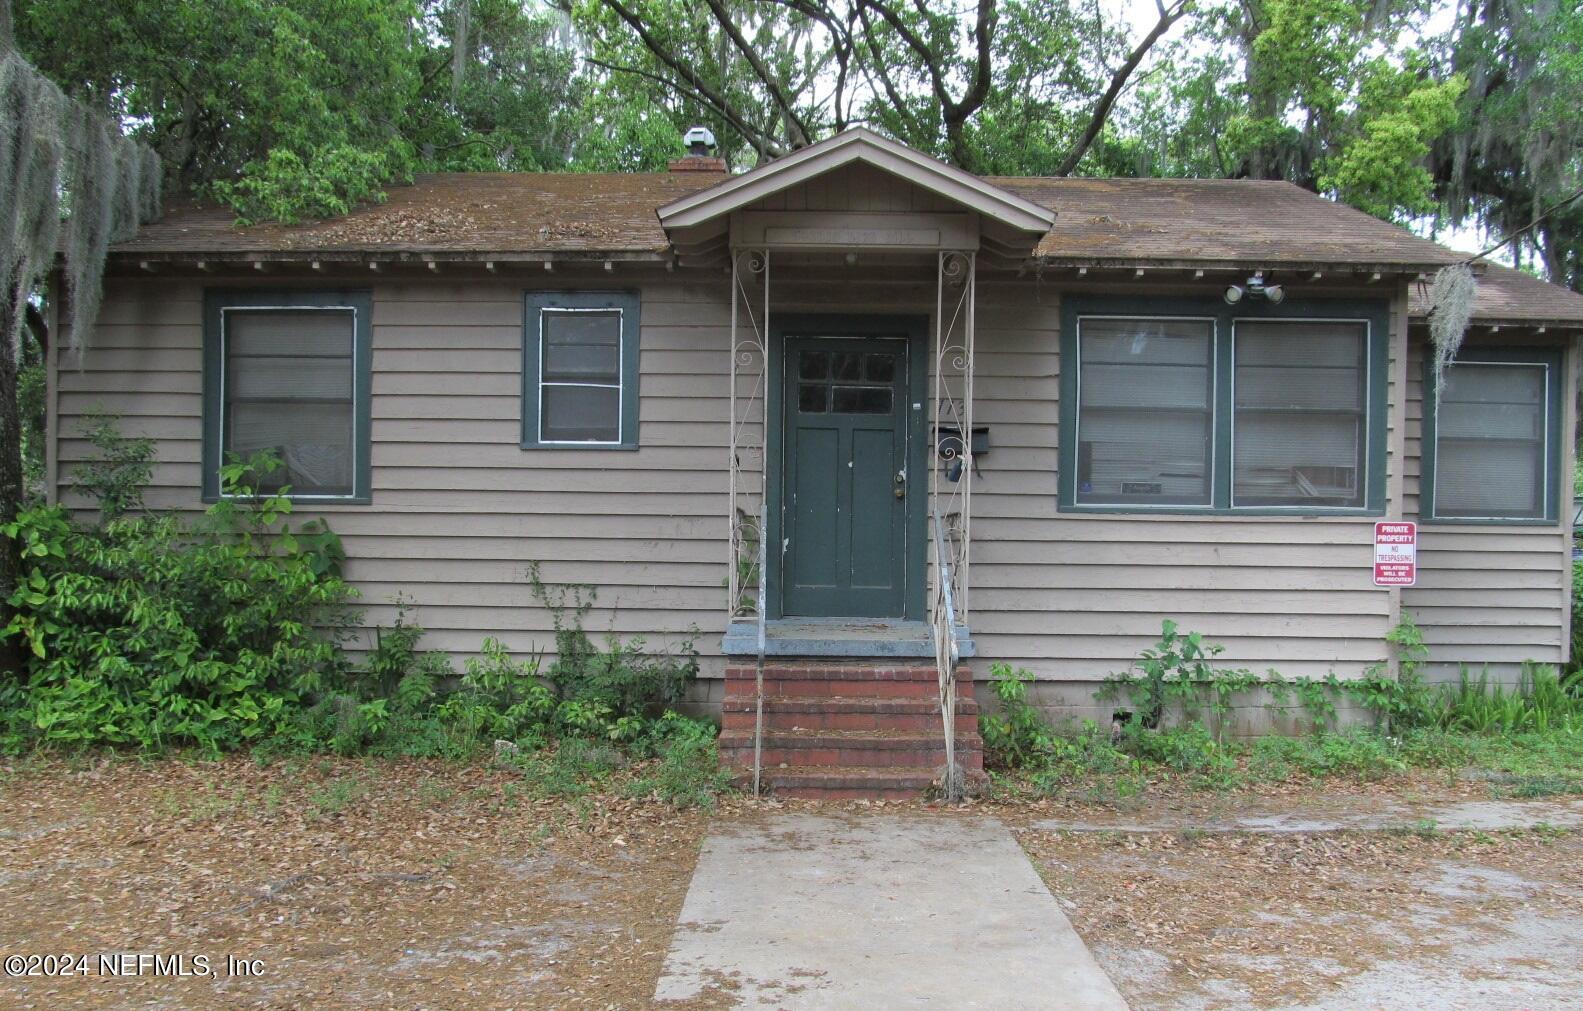 Jacksonville, FL home for sale located at 113 W 25TH Street, Jacksonville, FL 32206